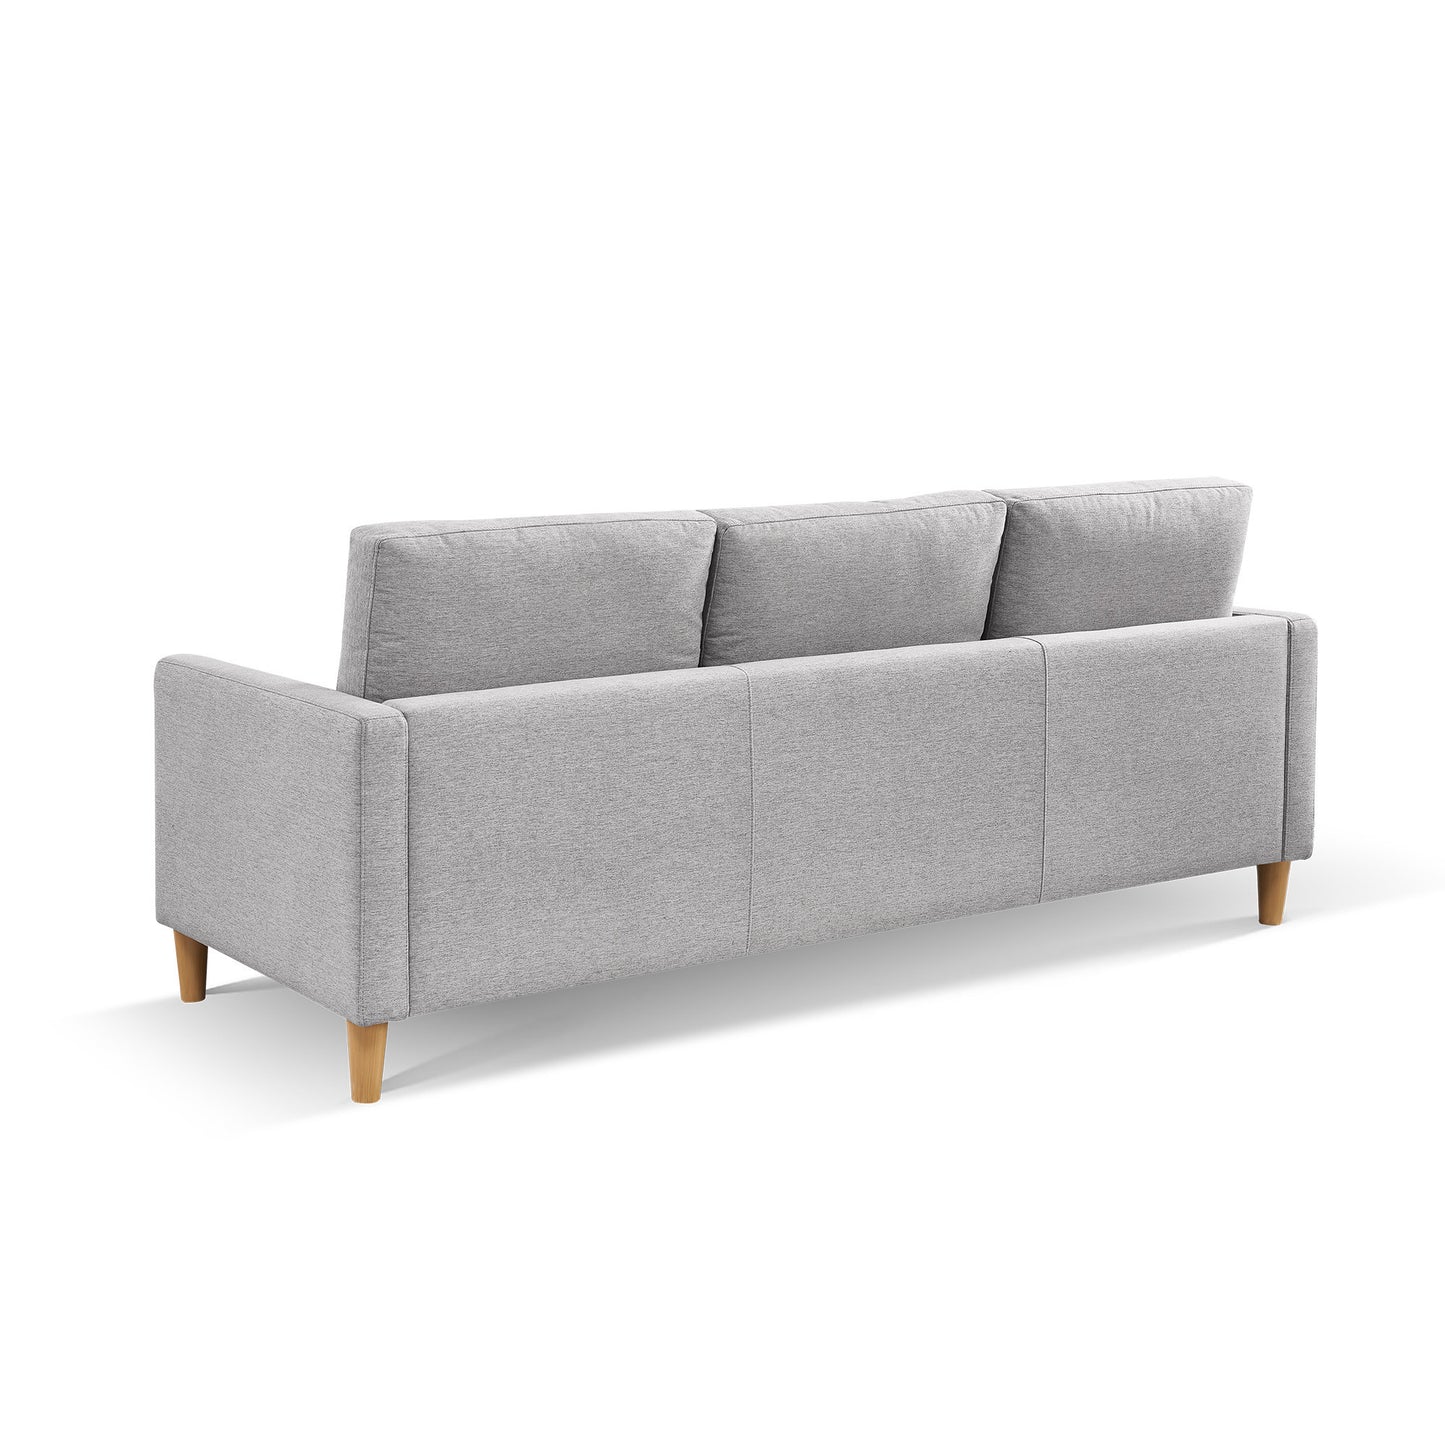 87 Inches  Wide Modern  Convertible Sectional Sofa & Chaise, L Shaped Tufted Fabric Couch, Reversible Sectional Sofa with Ottoman - Light Grey - Enova Luxe Home Store